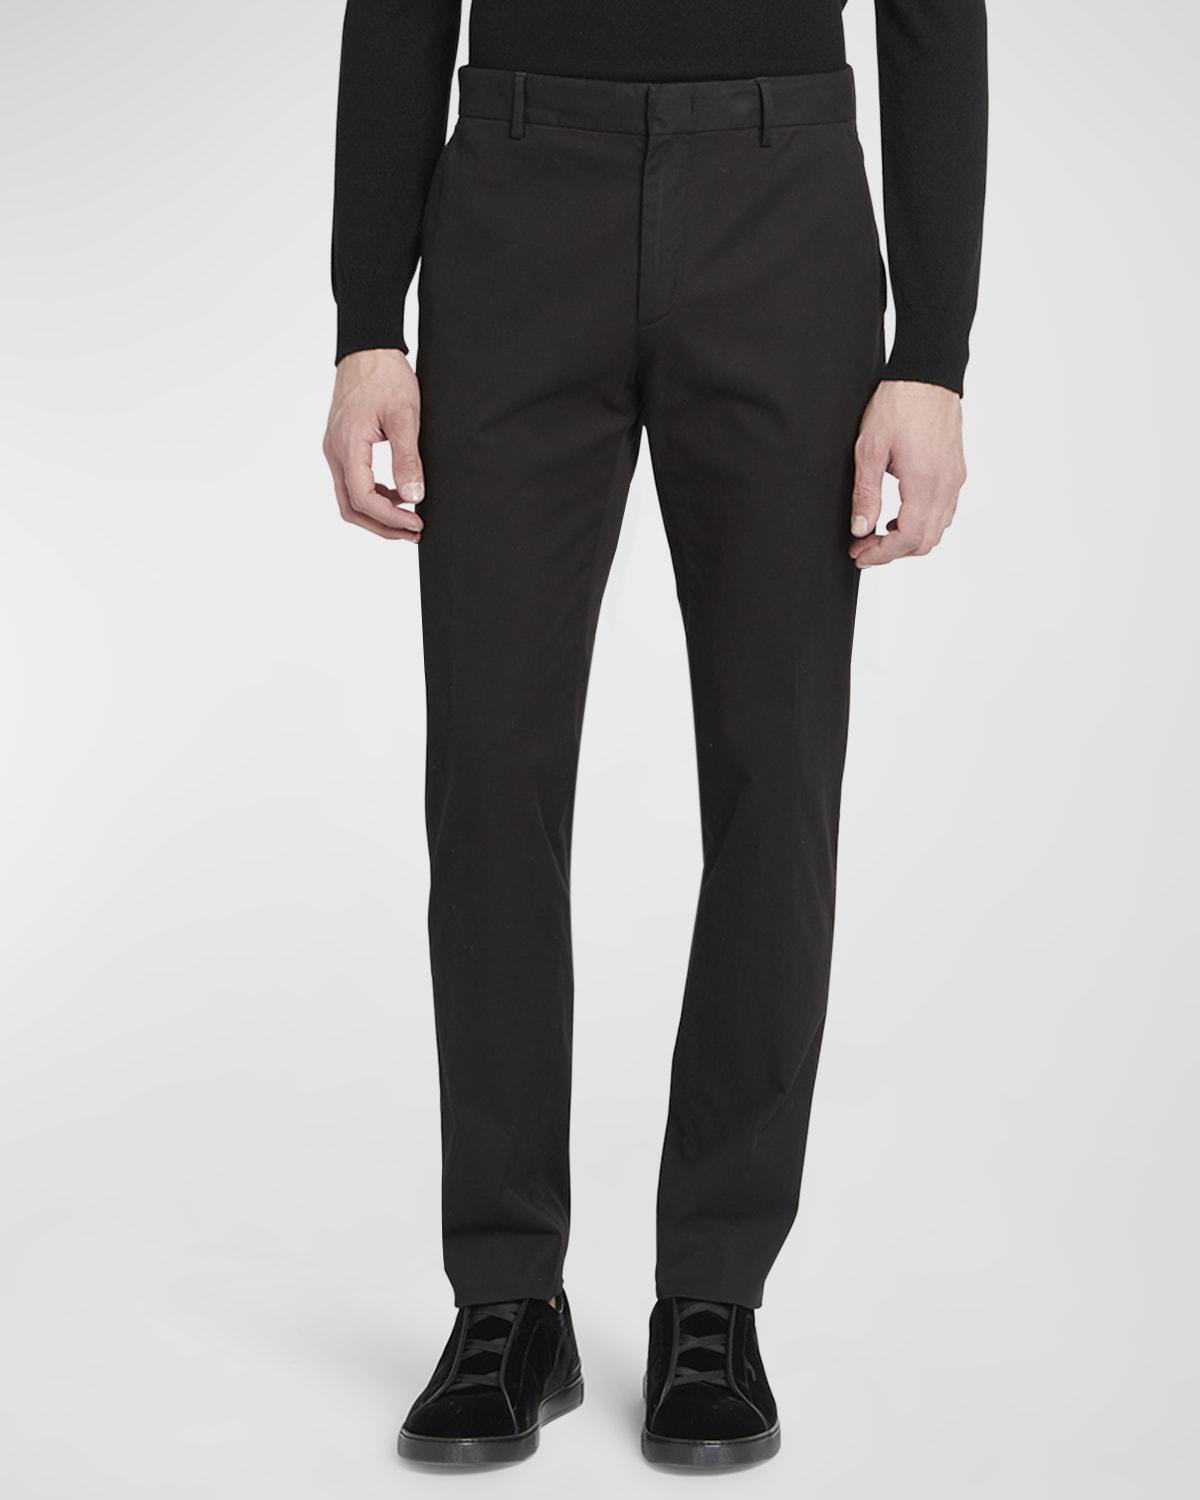 Zegna Cotton Trousers In Black Solid